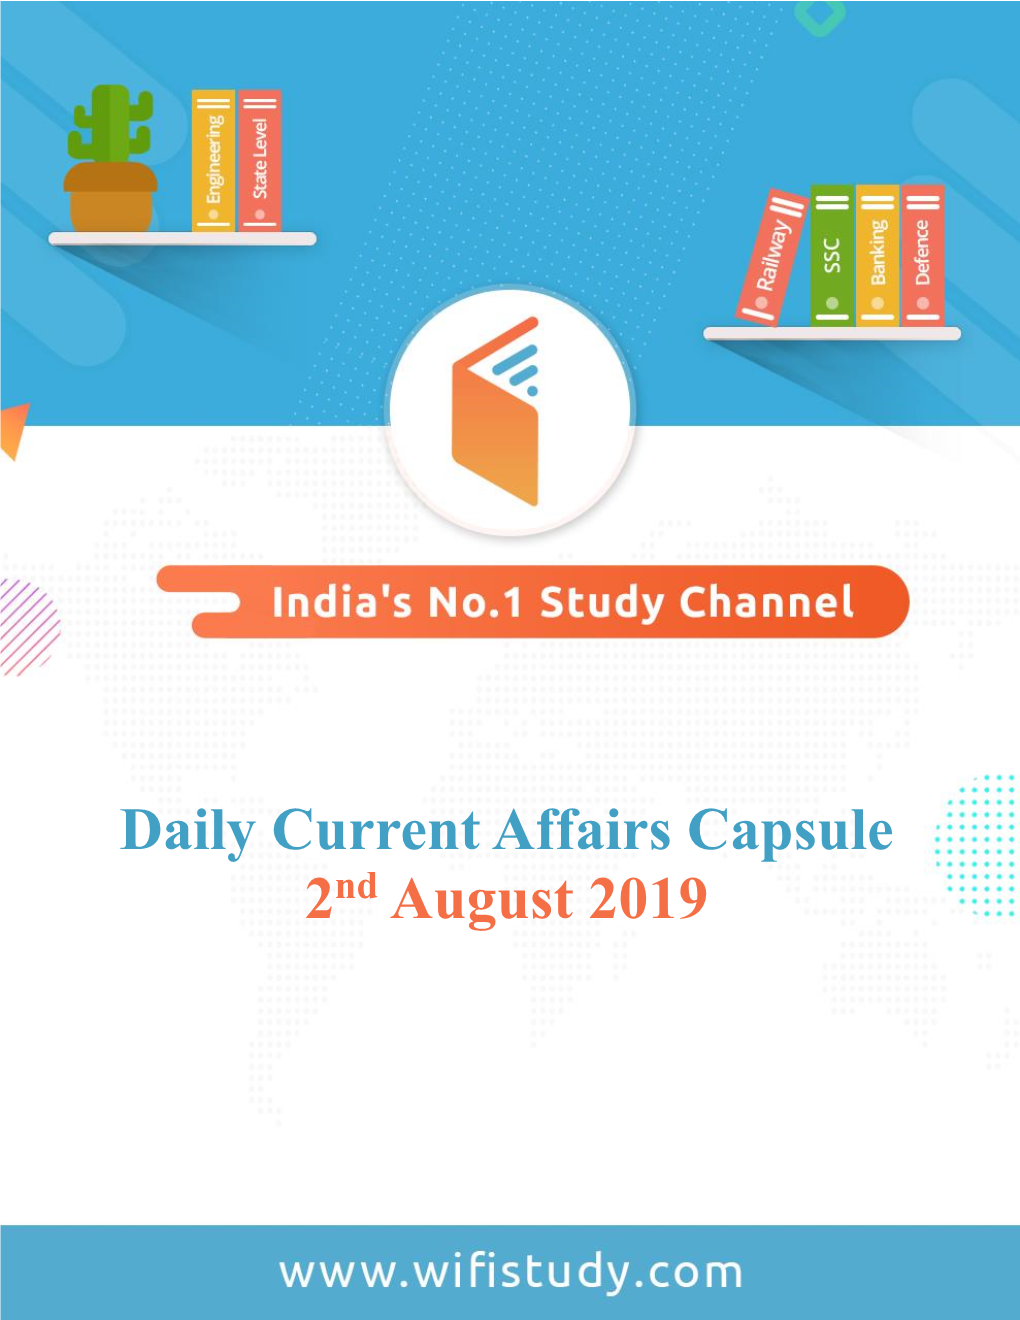 Daily Current Affairs Capsule 2Nd August 2019